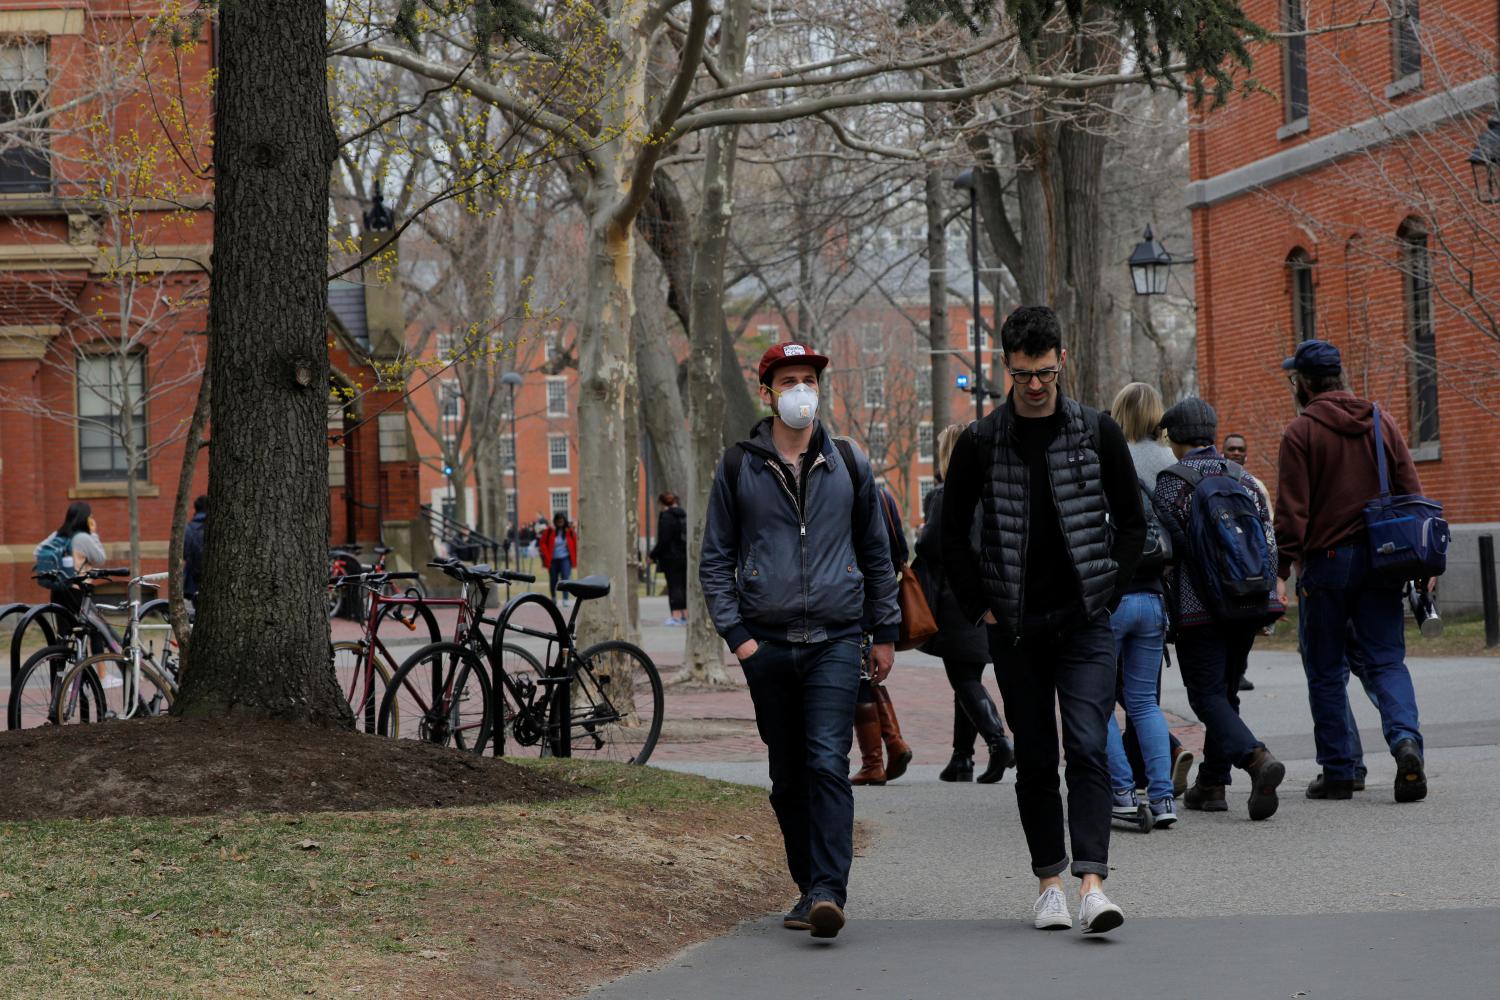 A student wearing a mask, because his cancer treatment has left him immunosuppressed and vulnerable to diseases such as the coronavirus, walks through the Yard at Harvard University, after the school asked its students not to return to campus after Spring Break and said it would move to virtual instruction for graduate and undergraduate classes, in Cambridge, Massachusetts, U.S., March 10, 2020.   REUTERS/Brian Snyder